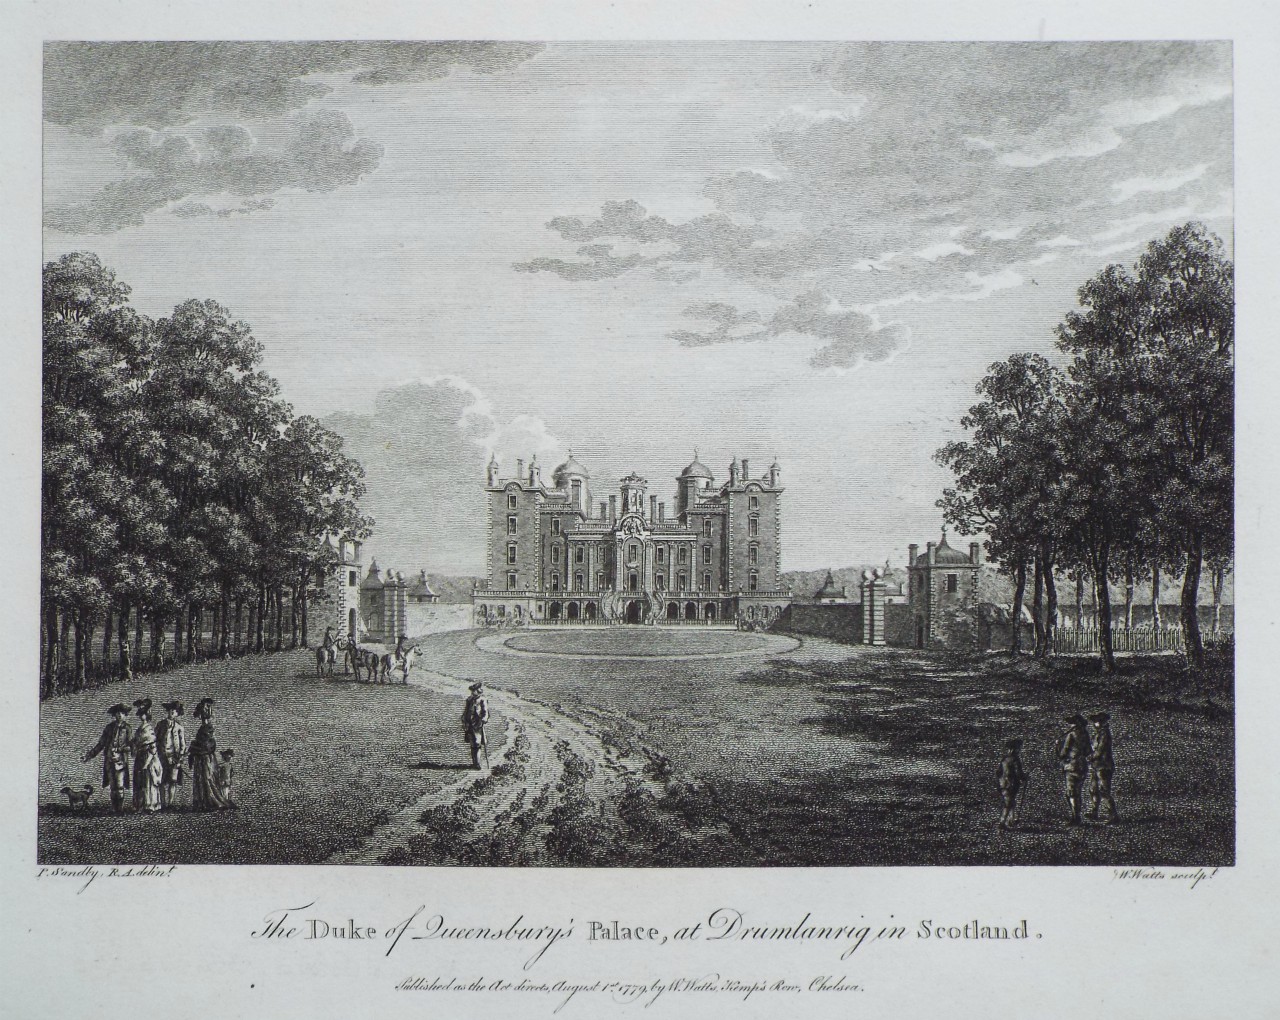 Print - The Duke of Queensbury's Palace, at Drumlanrig in Scotland - Watts